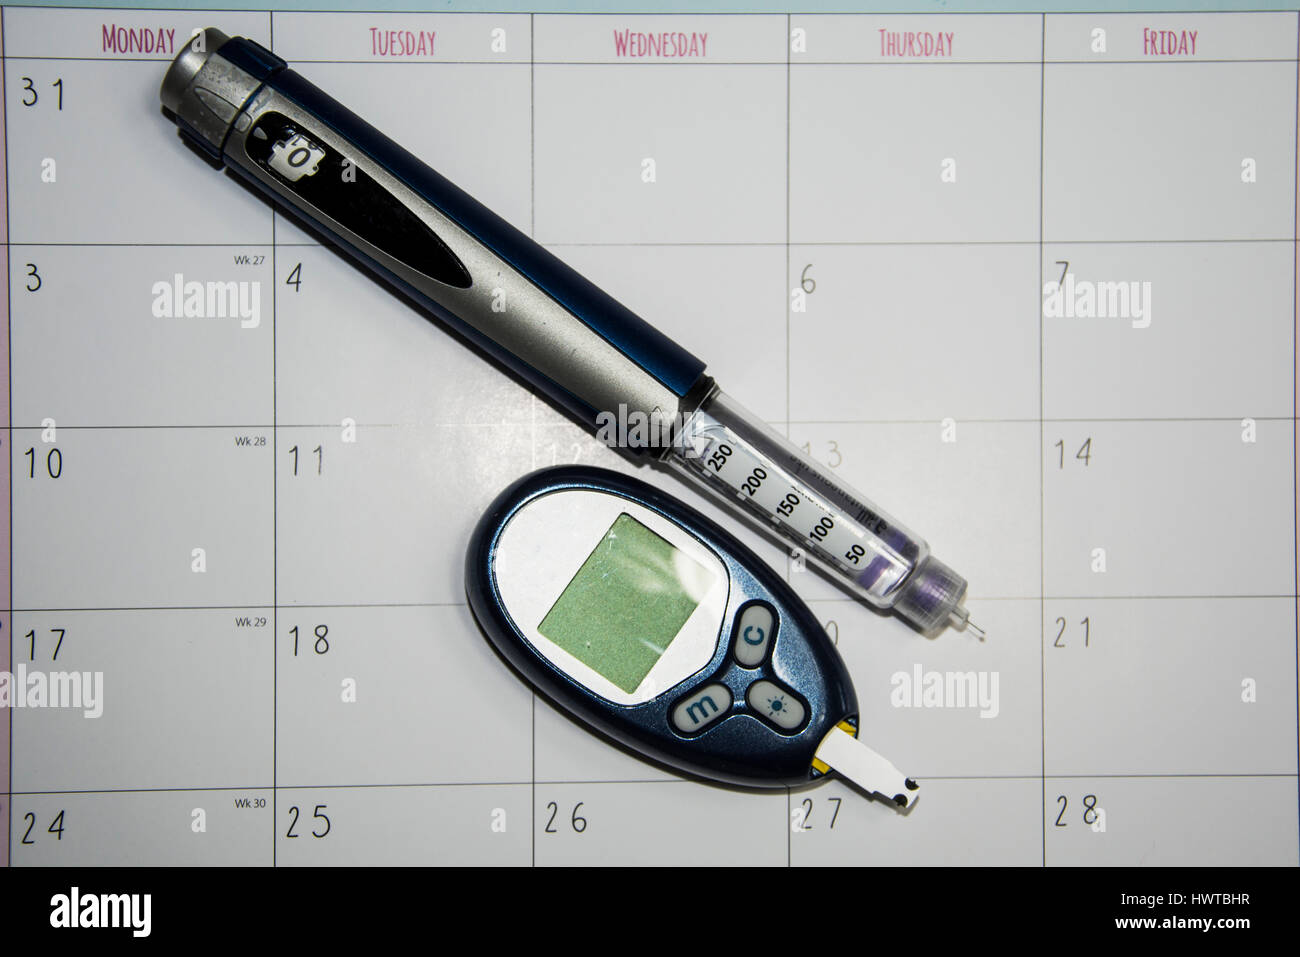 Living with Diabetes an everyday routine Stock Photo